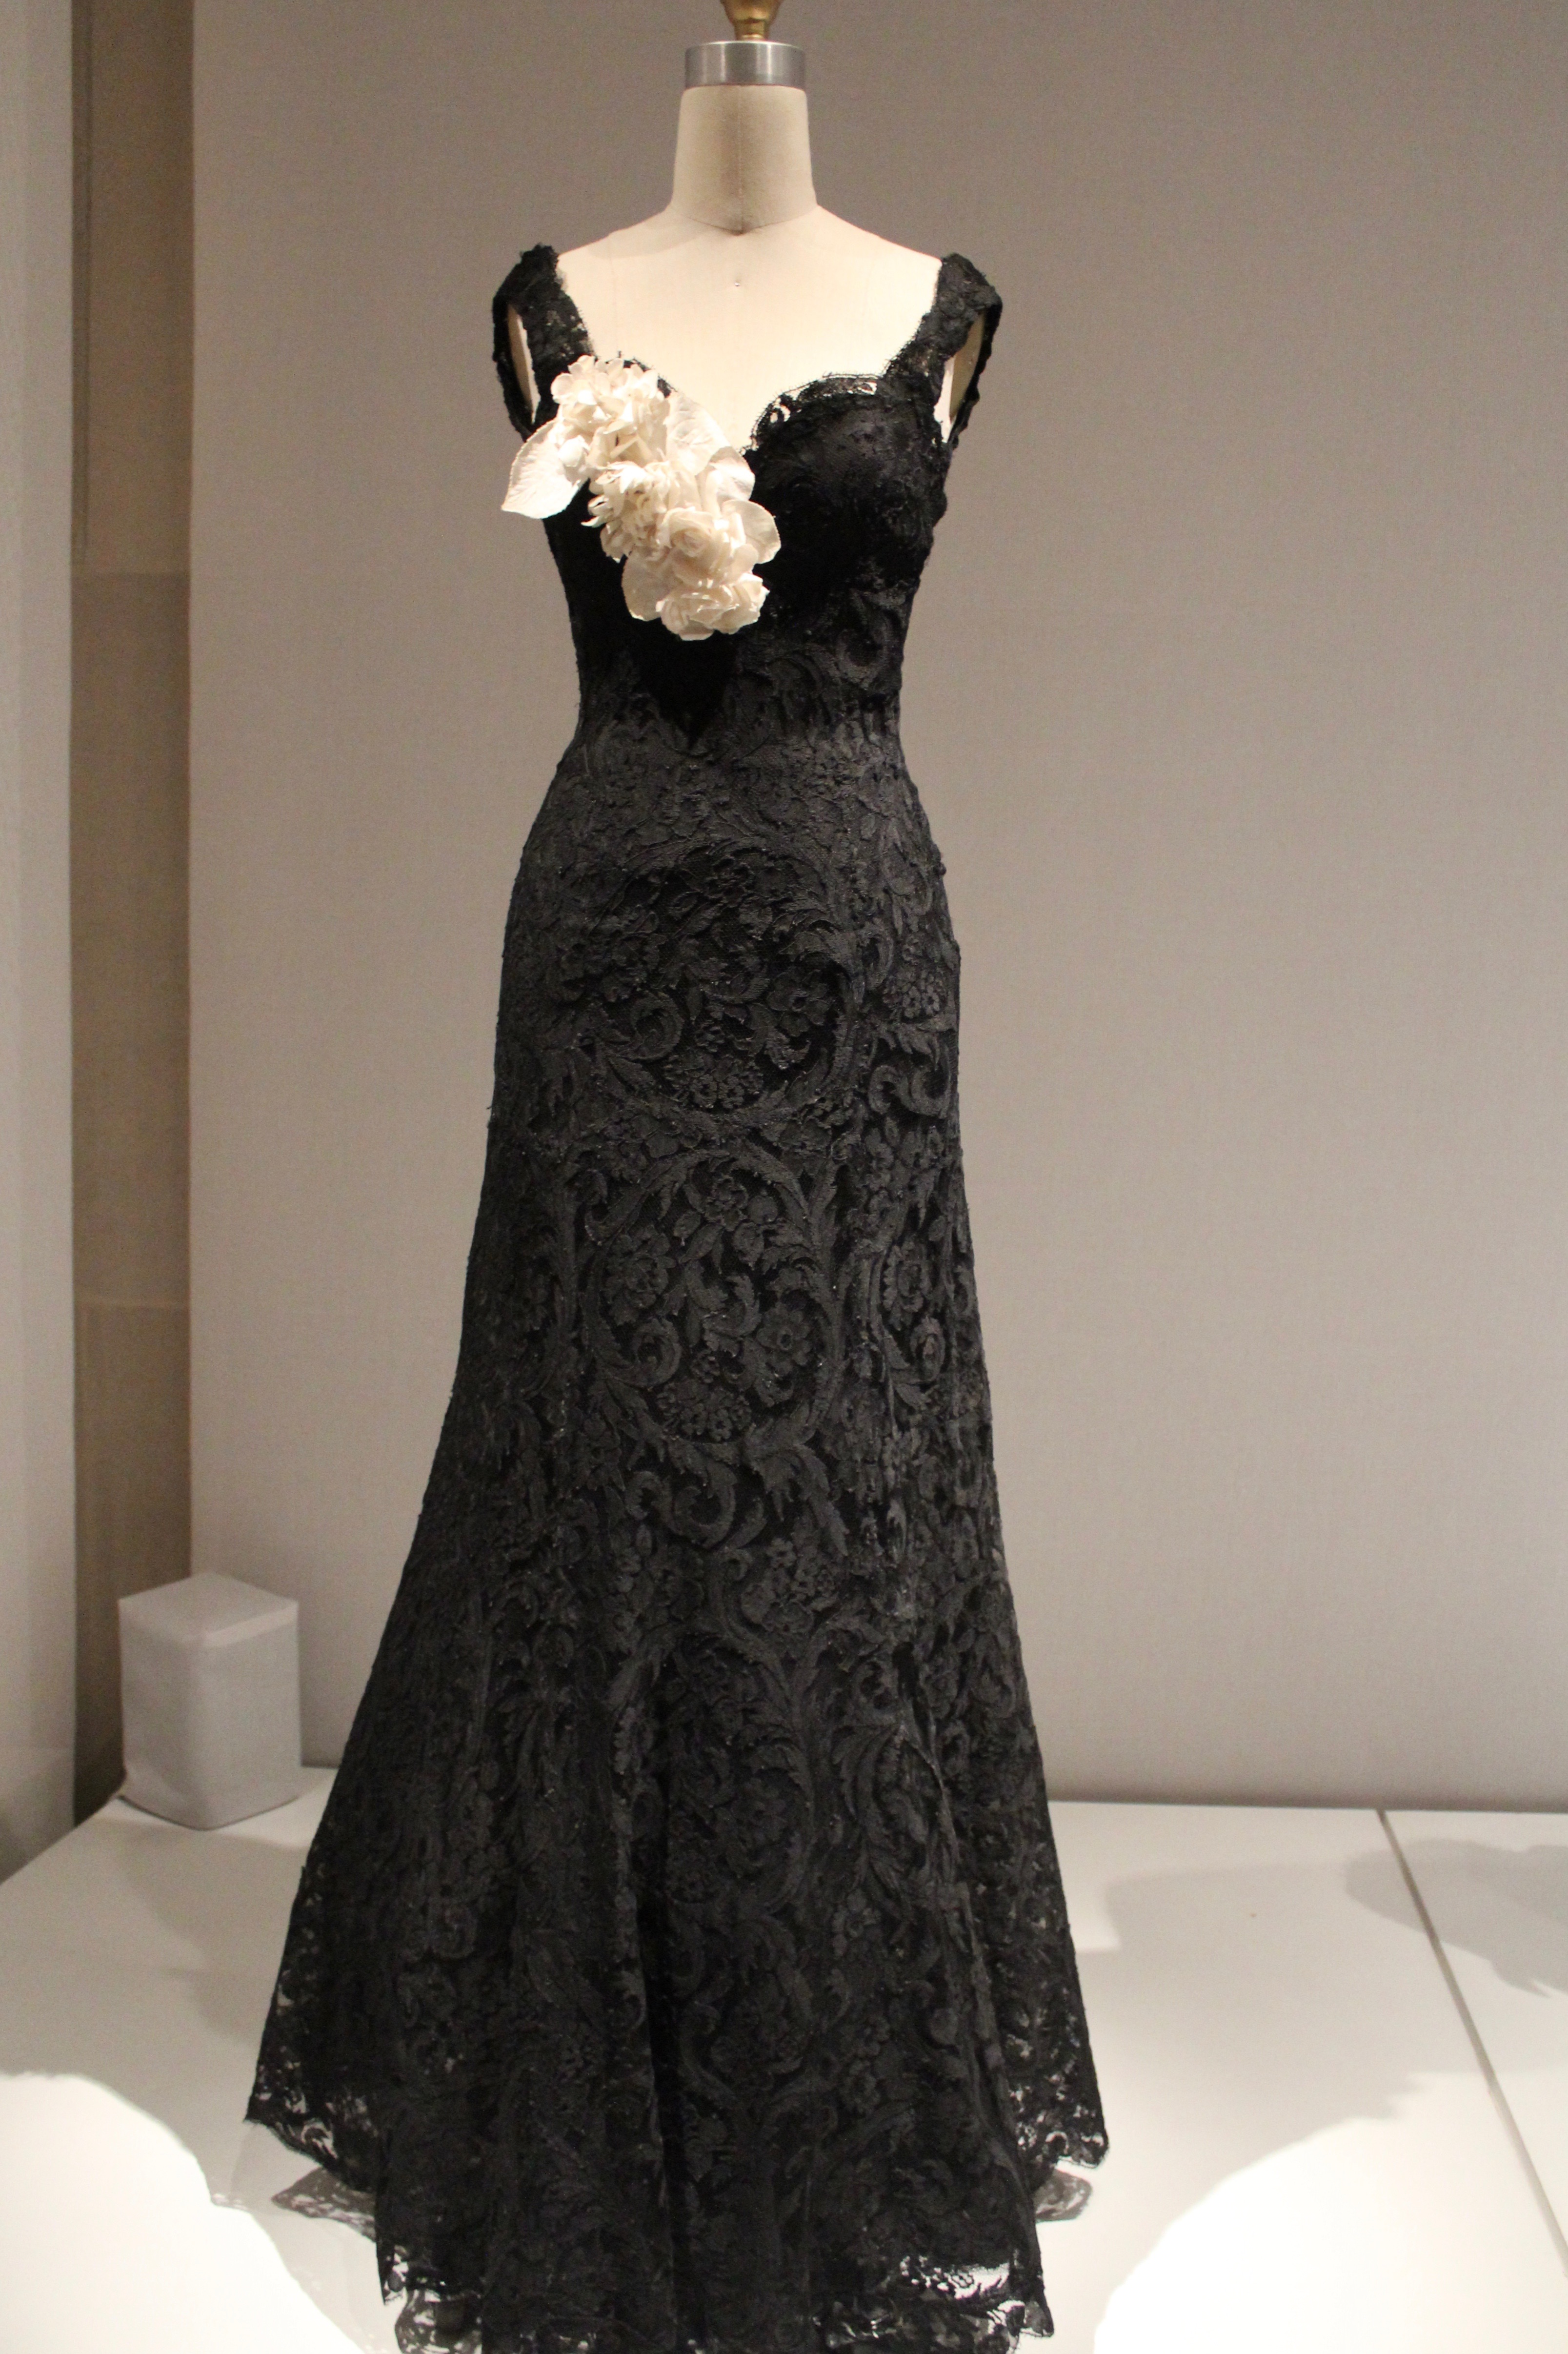 New York Calling: Manus x Machina, House of Chanel Evening Dress, 1937-1938, Haute Couture, Hand-sewn, machine-made black silk rayon lace, hand-shaped with wire and horsehair at sleeves; hand-attached, machine-sewn black rayon crepe liner; white linen floral corsage with die-cut, hand-embossed, and hand-assembled flowers.